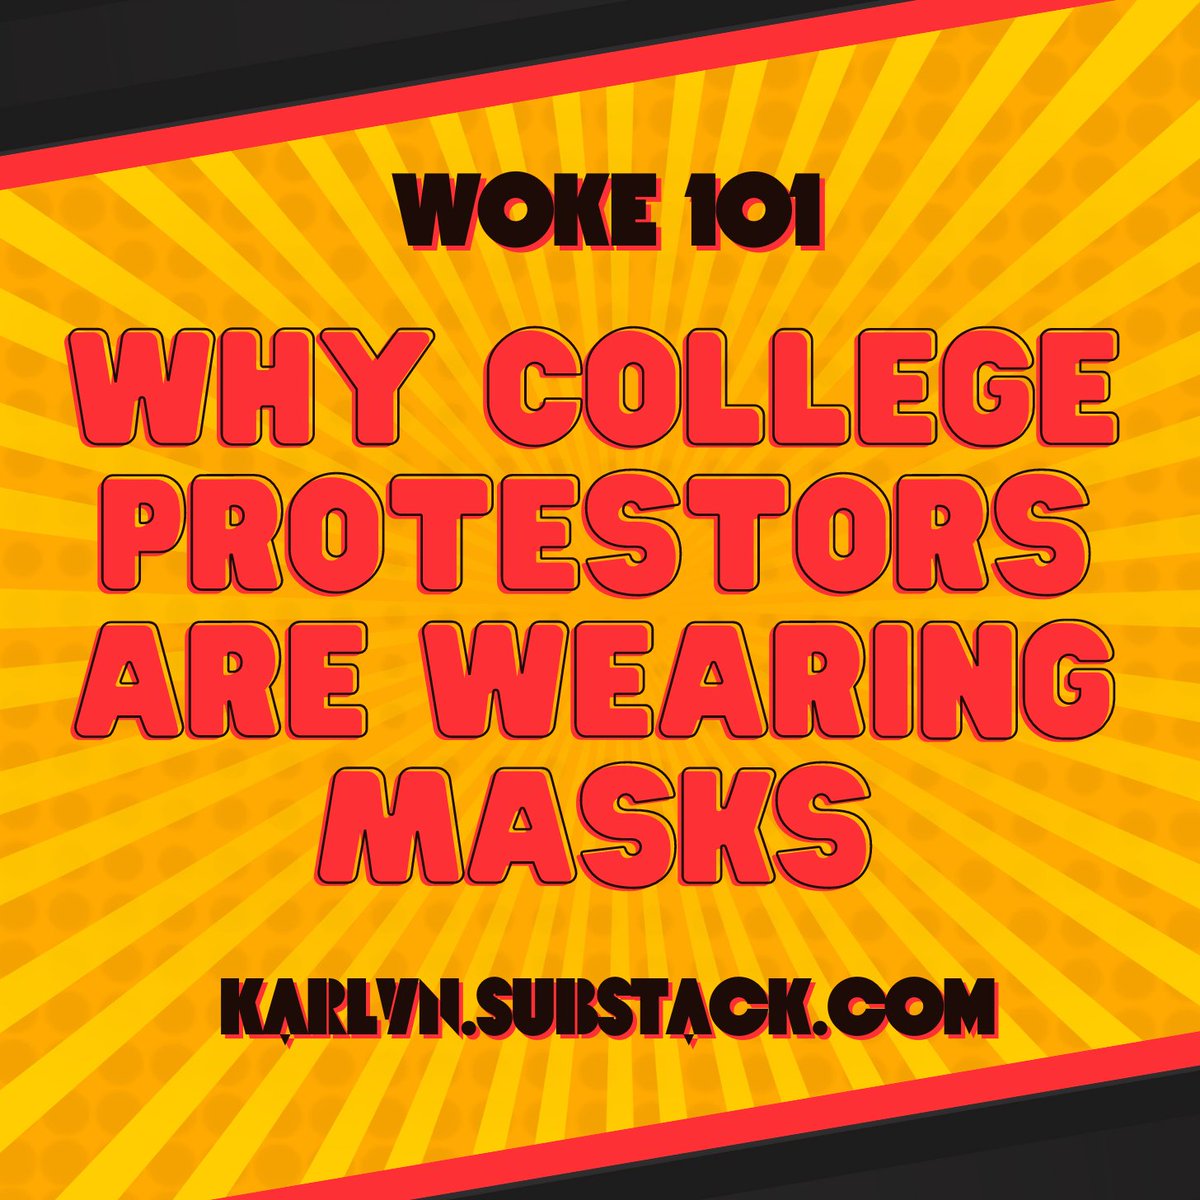 Are you confused about why college protestors are wearing masks? The fact is that most leftist events require (or strongly recommend) mask-wearing. And it may not be why you think. I explain, in the latest post in my WOKE 101 series: karlyn.substack.com/p/woke-101-why…